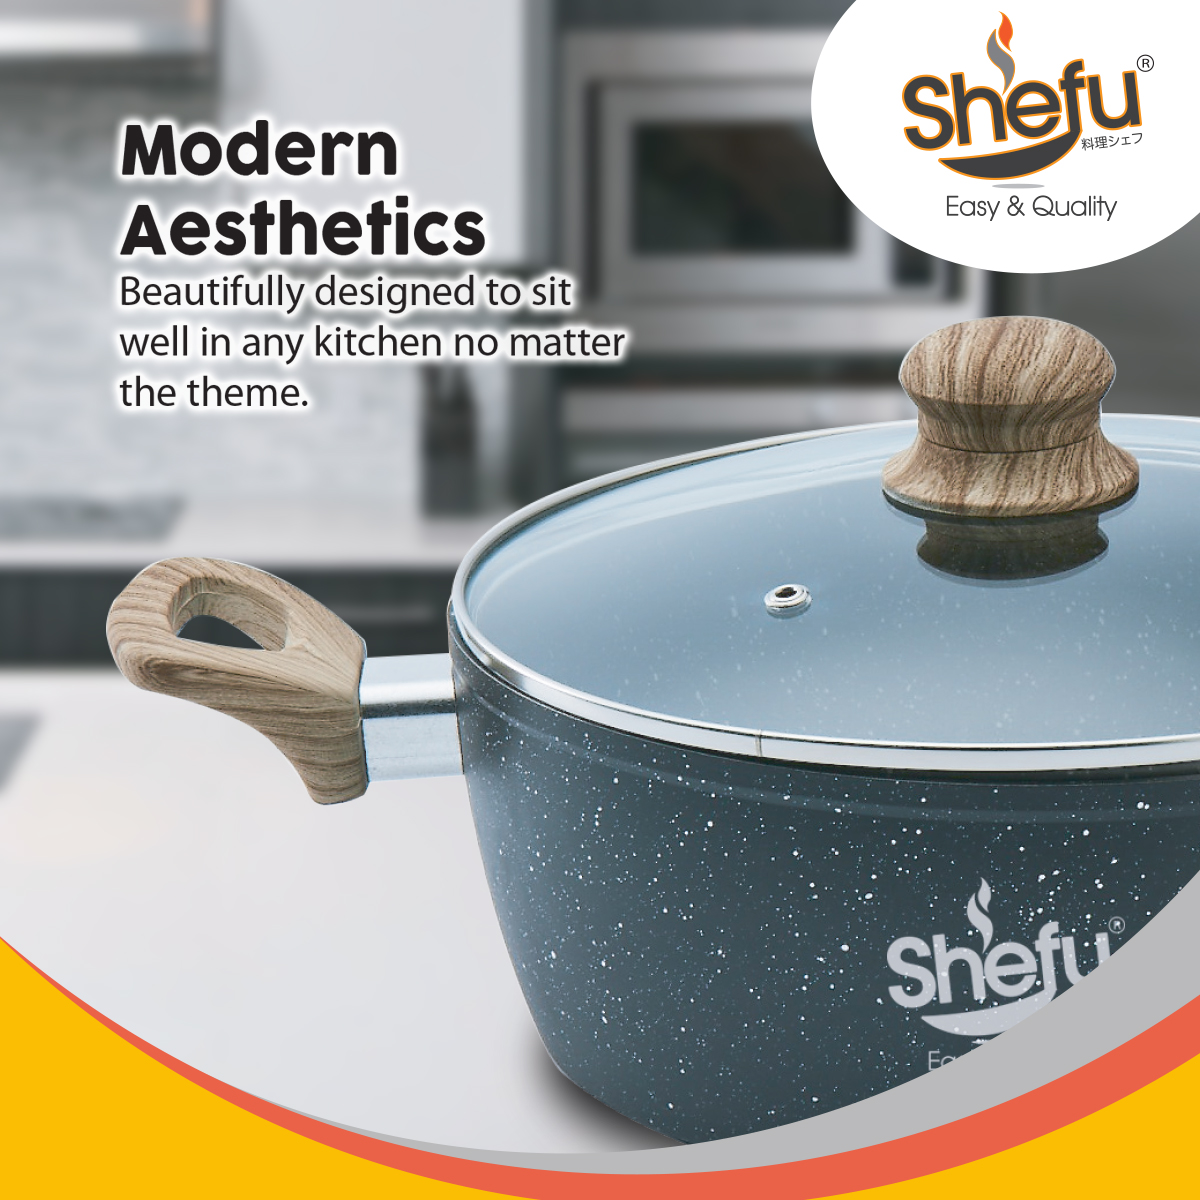 SHEFU 24cm Marble Stone Casserole With Tempered Glass Lid